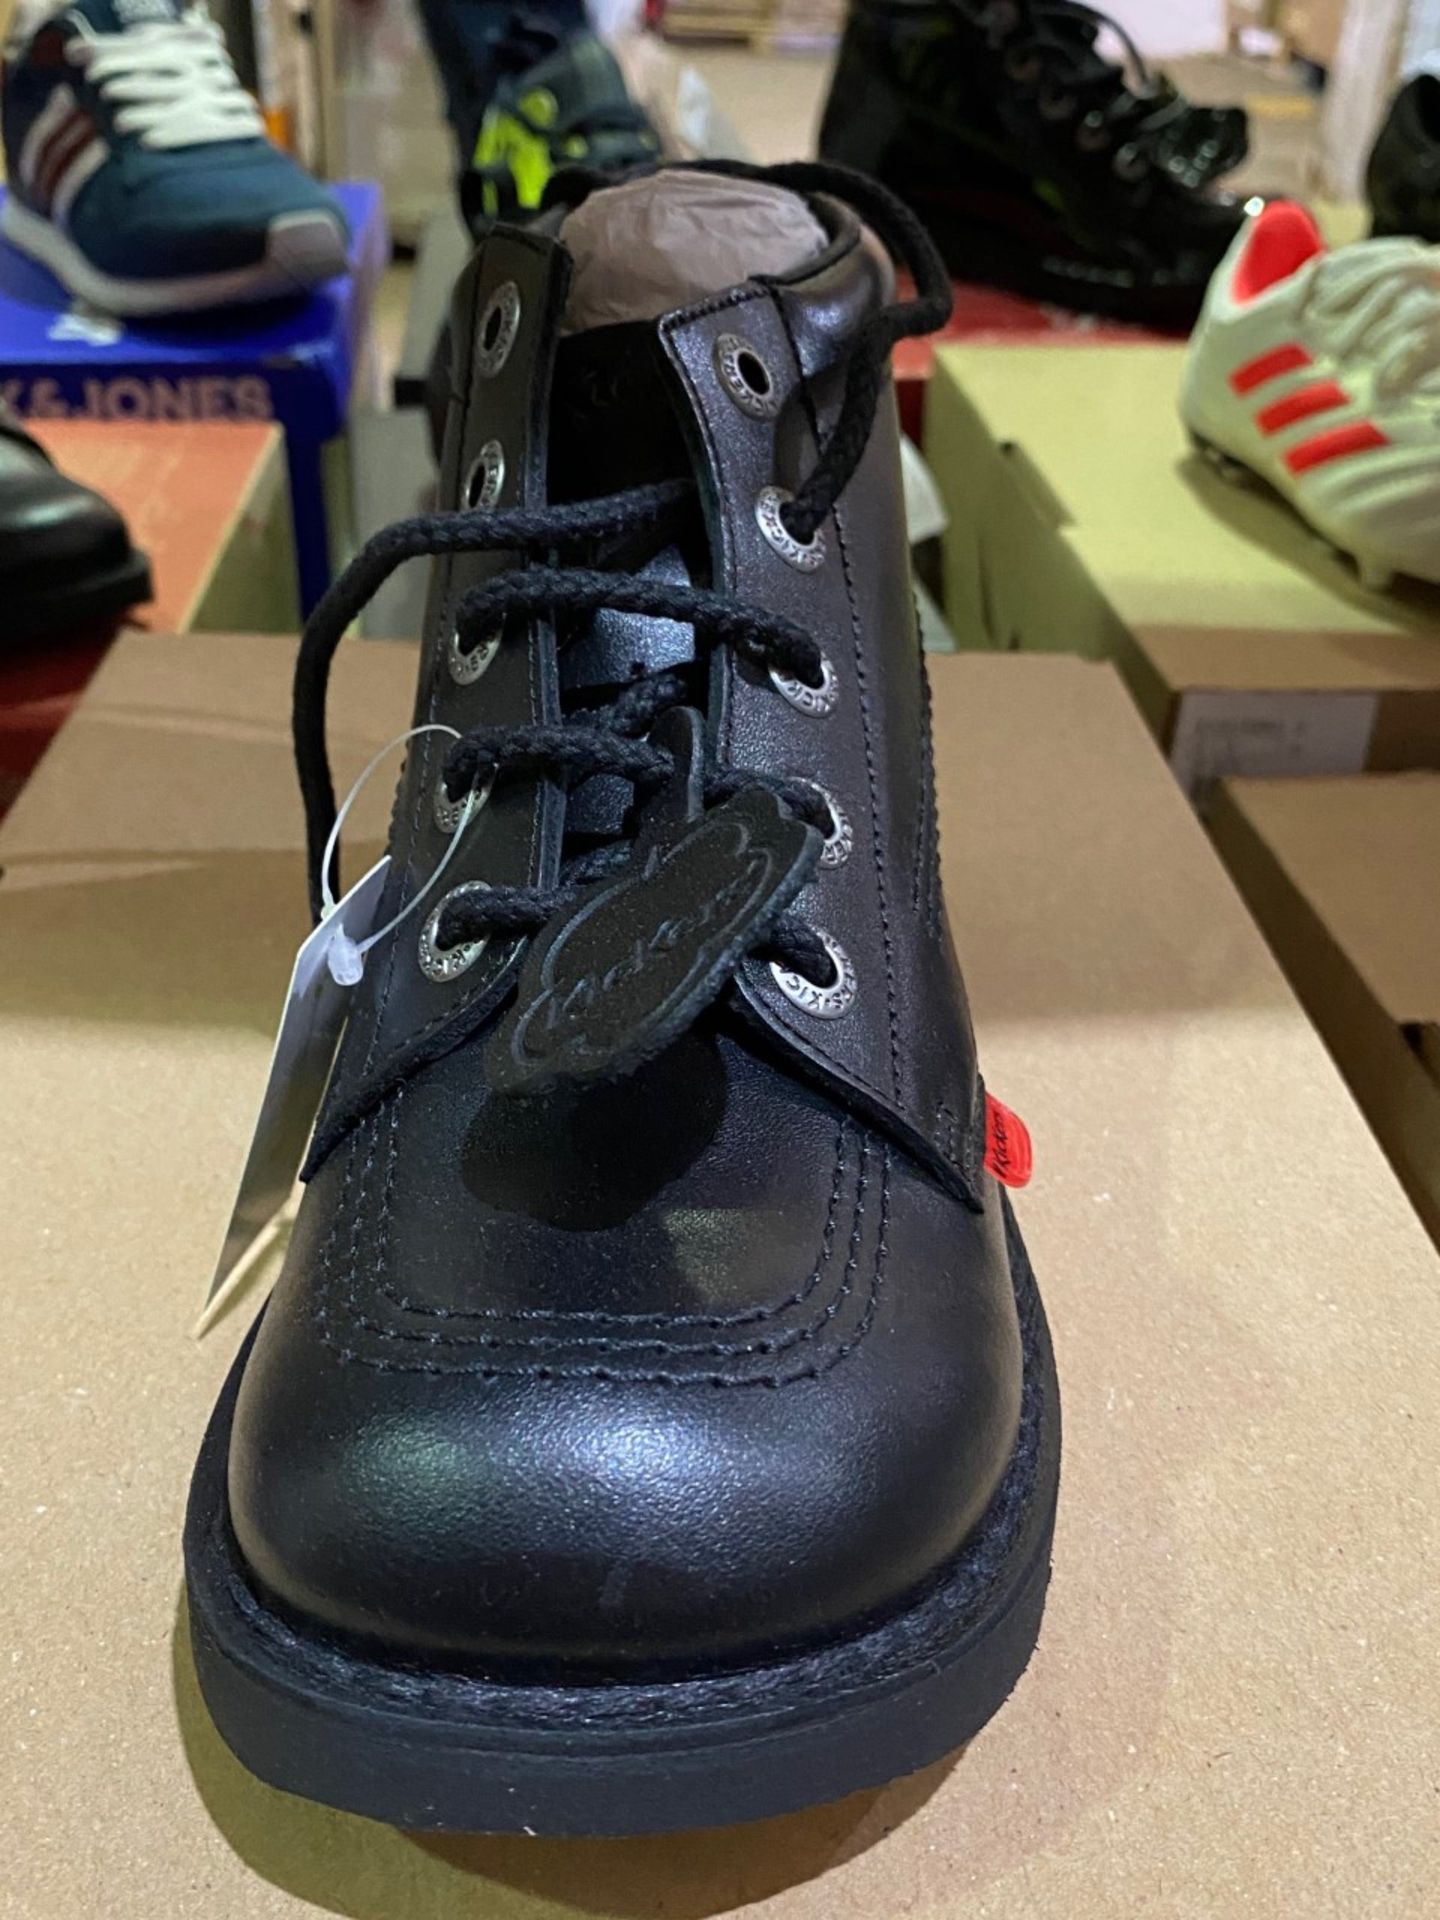 NEW & BOXED KICKERS BLACK SHOE SIZE JUNIOR 6 - Image 2 of 2